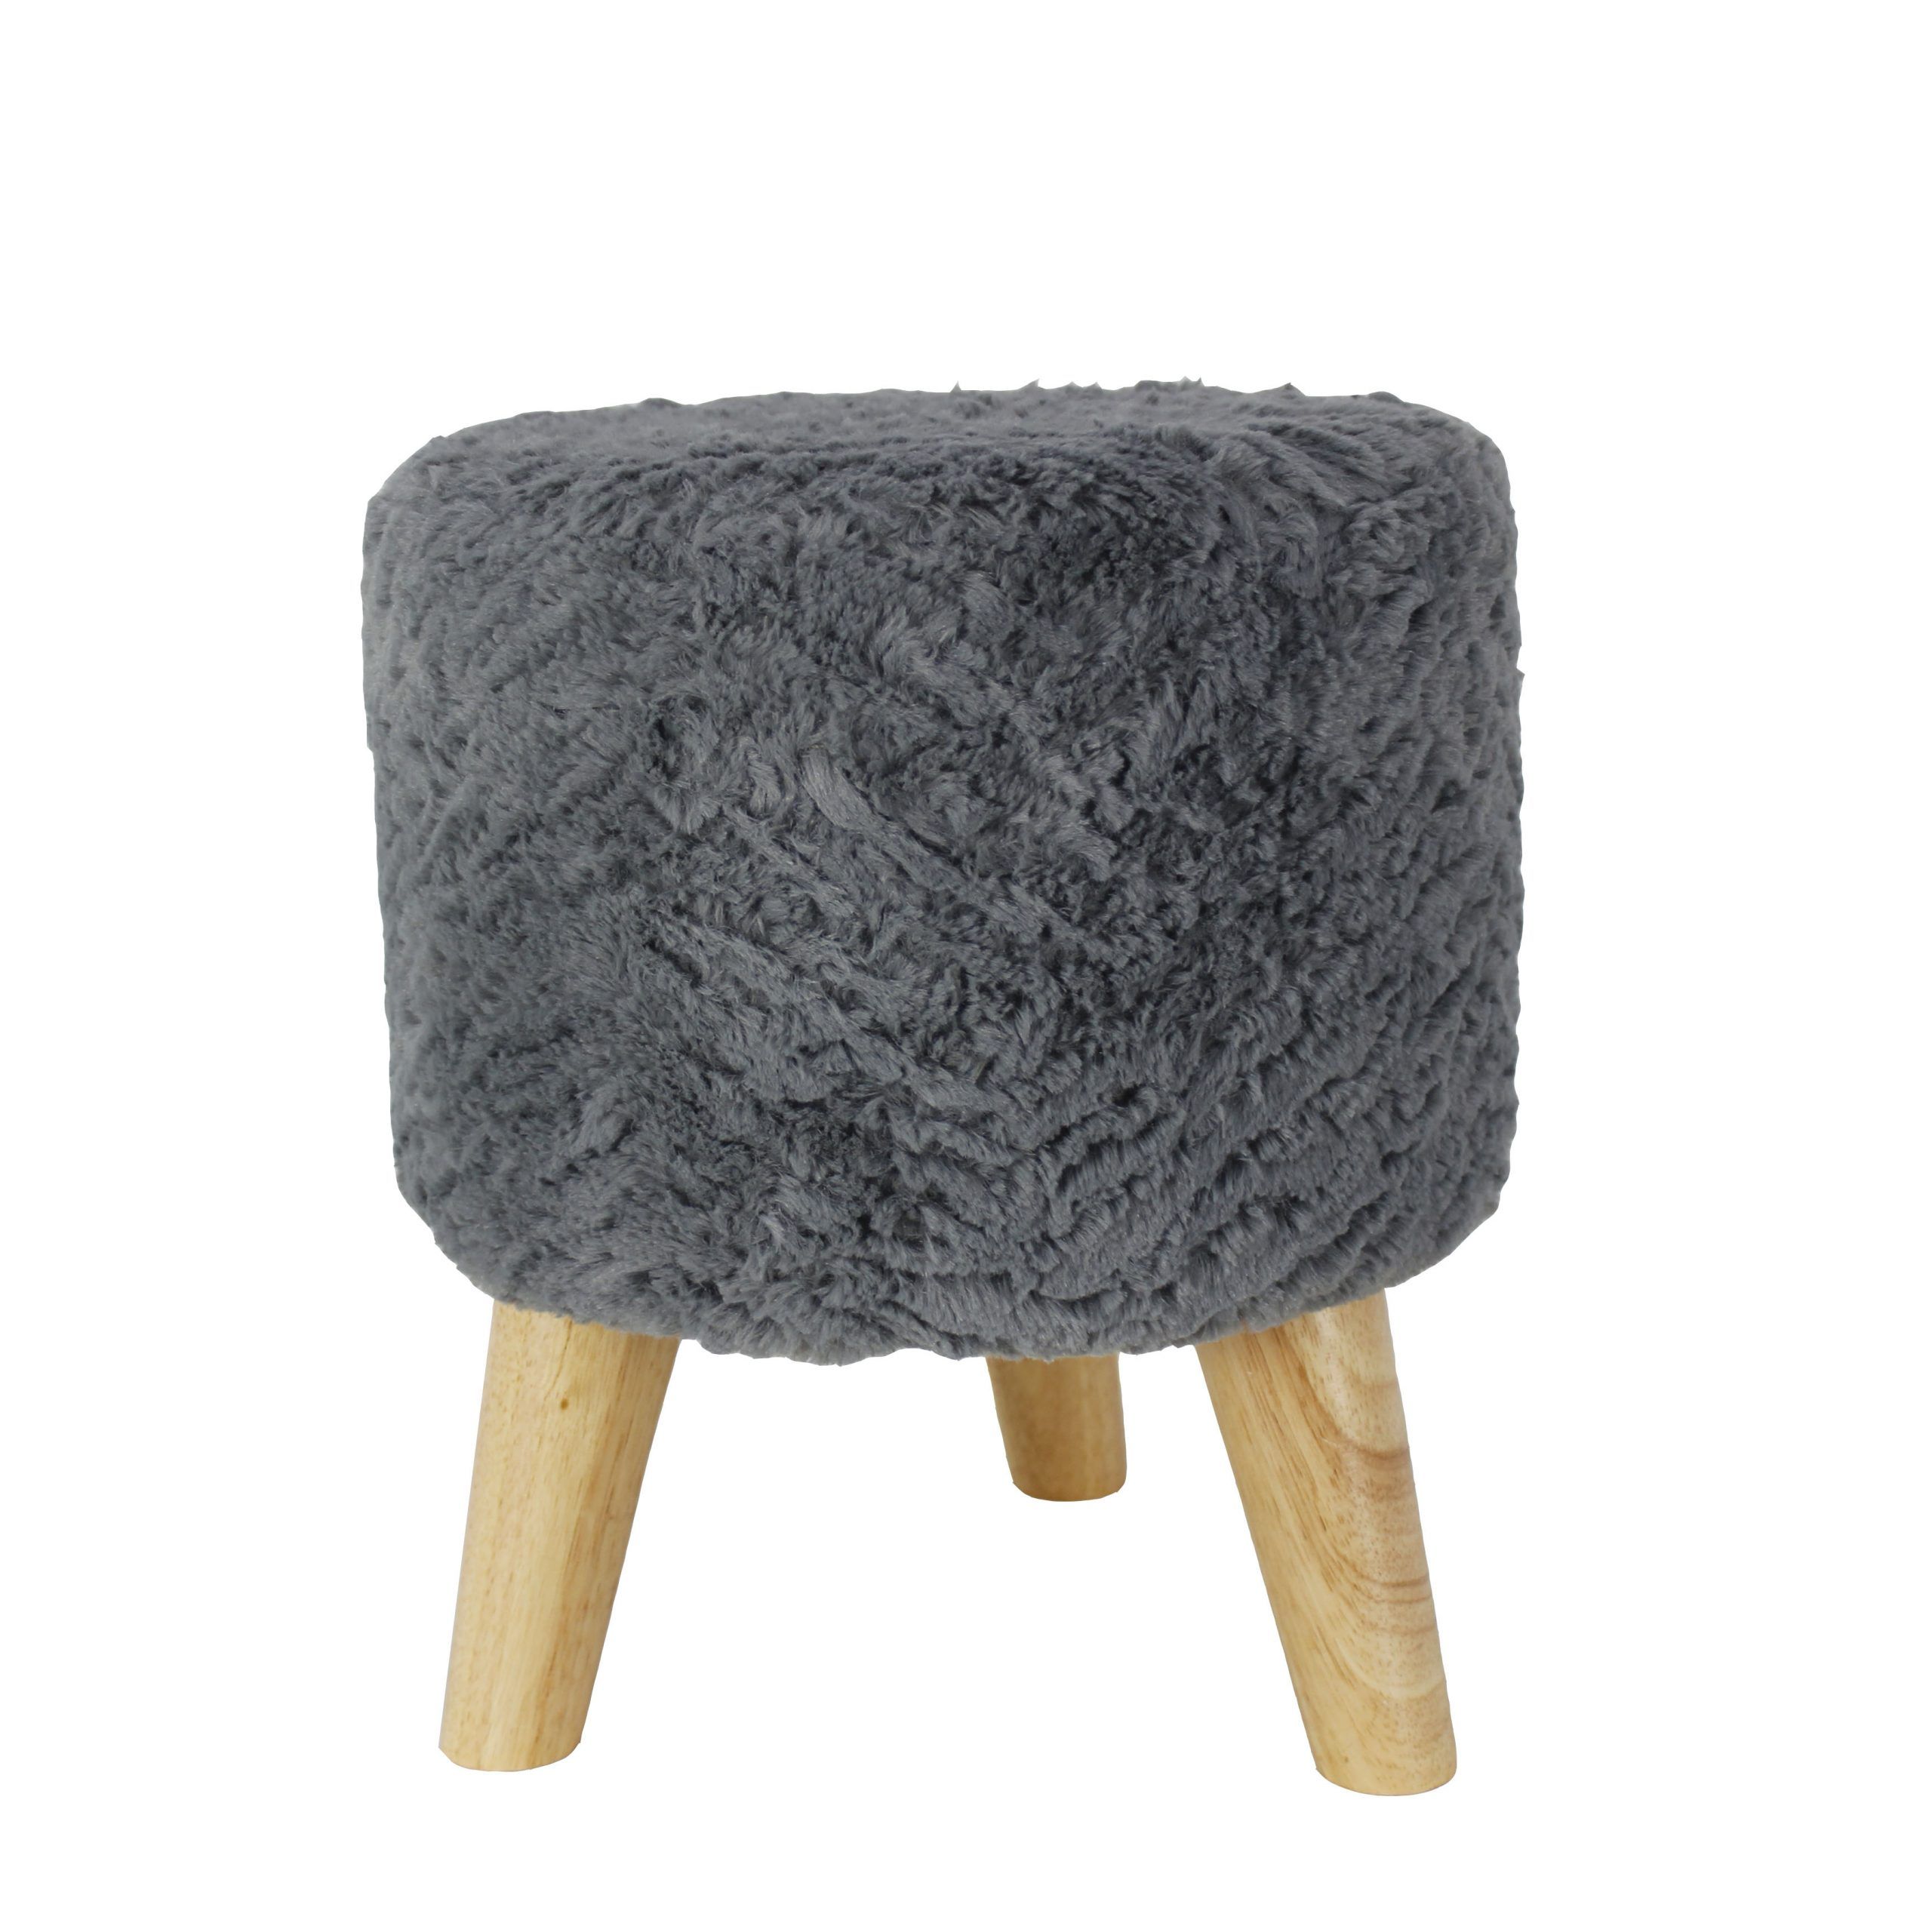 Widely Used Stone Wool With Wooden Legs Ottomans In Faux Fur Round Shape Foot Stool Ottoman Pouf Living Room Ottoman Stool (View 7 of 10)